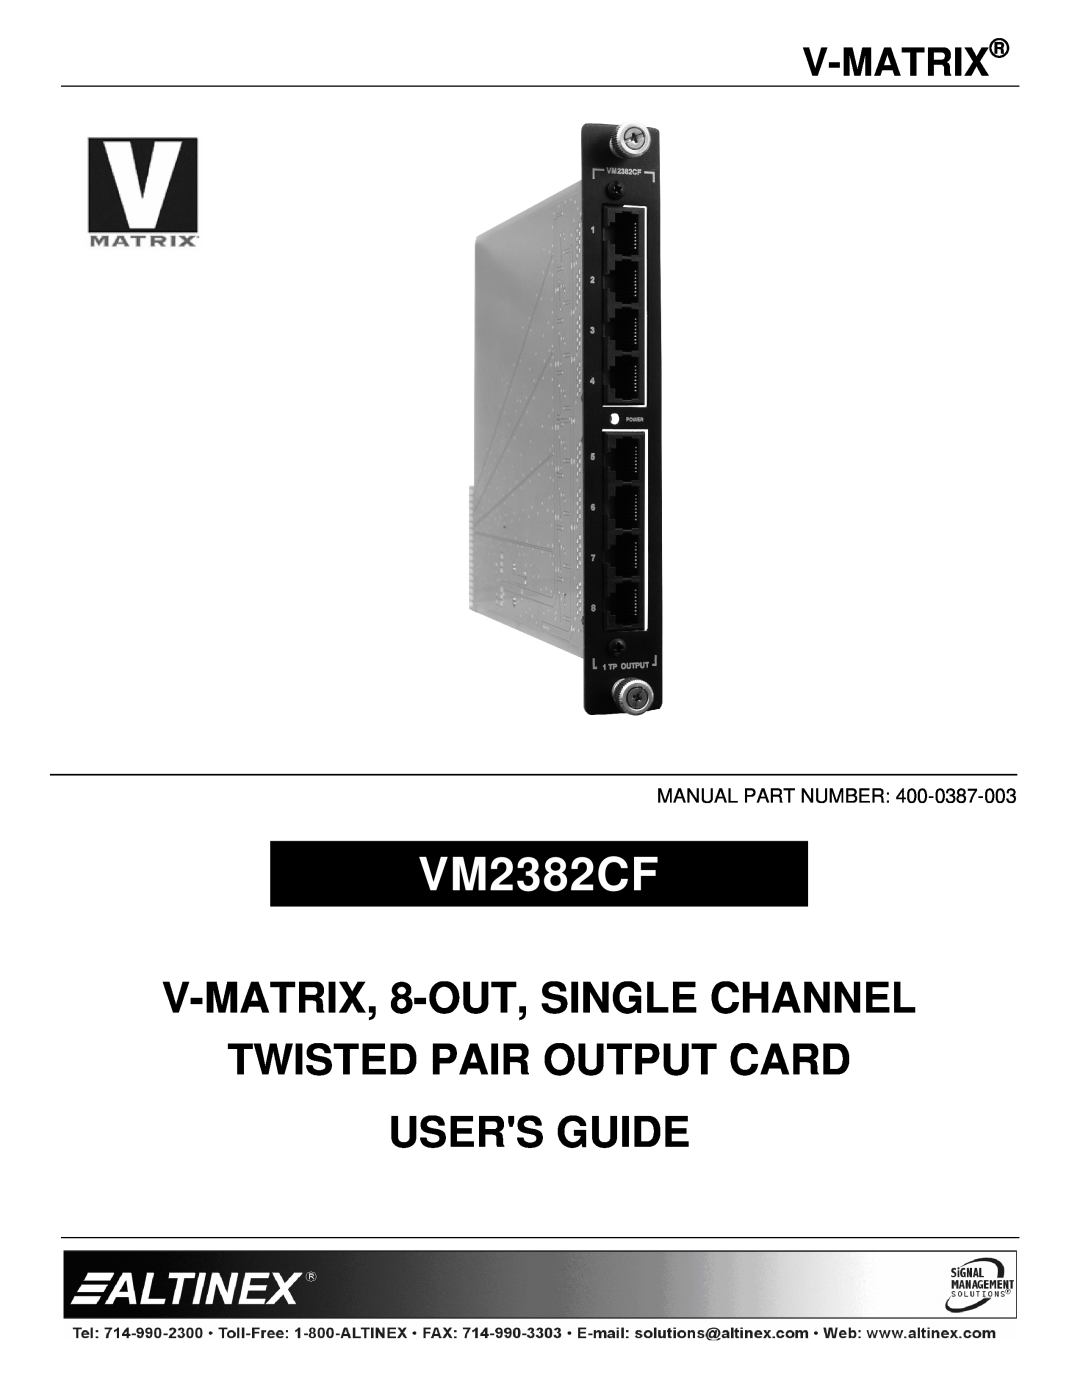 Altinex 400-0387-003 manual V-Matrix, VM2382CF, V-MATRIX, 8-OUT, SINGLE CHANNEL TWISTED PAIR OUTPUT CARD USERS GUIDE 